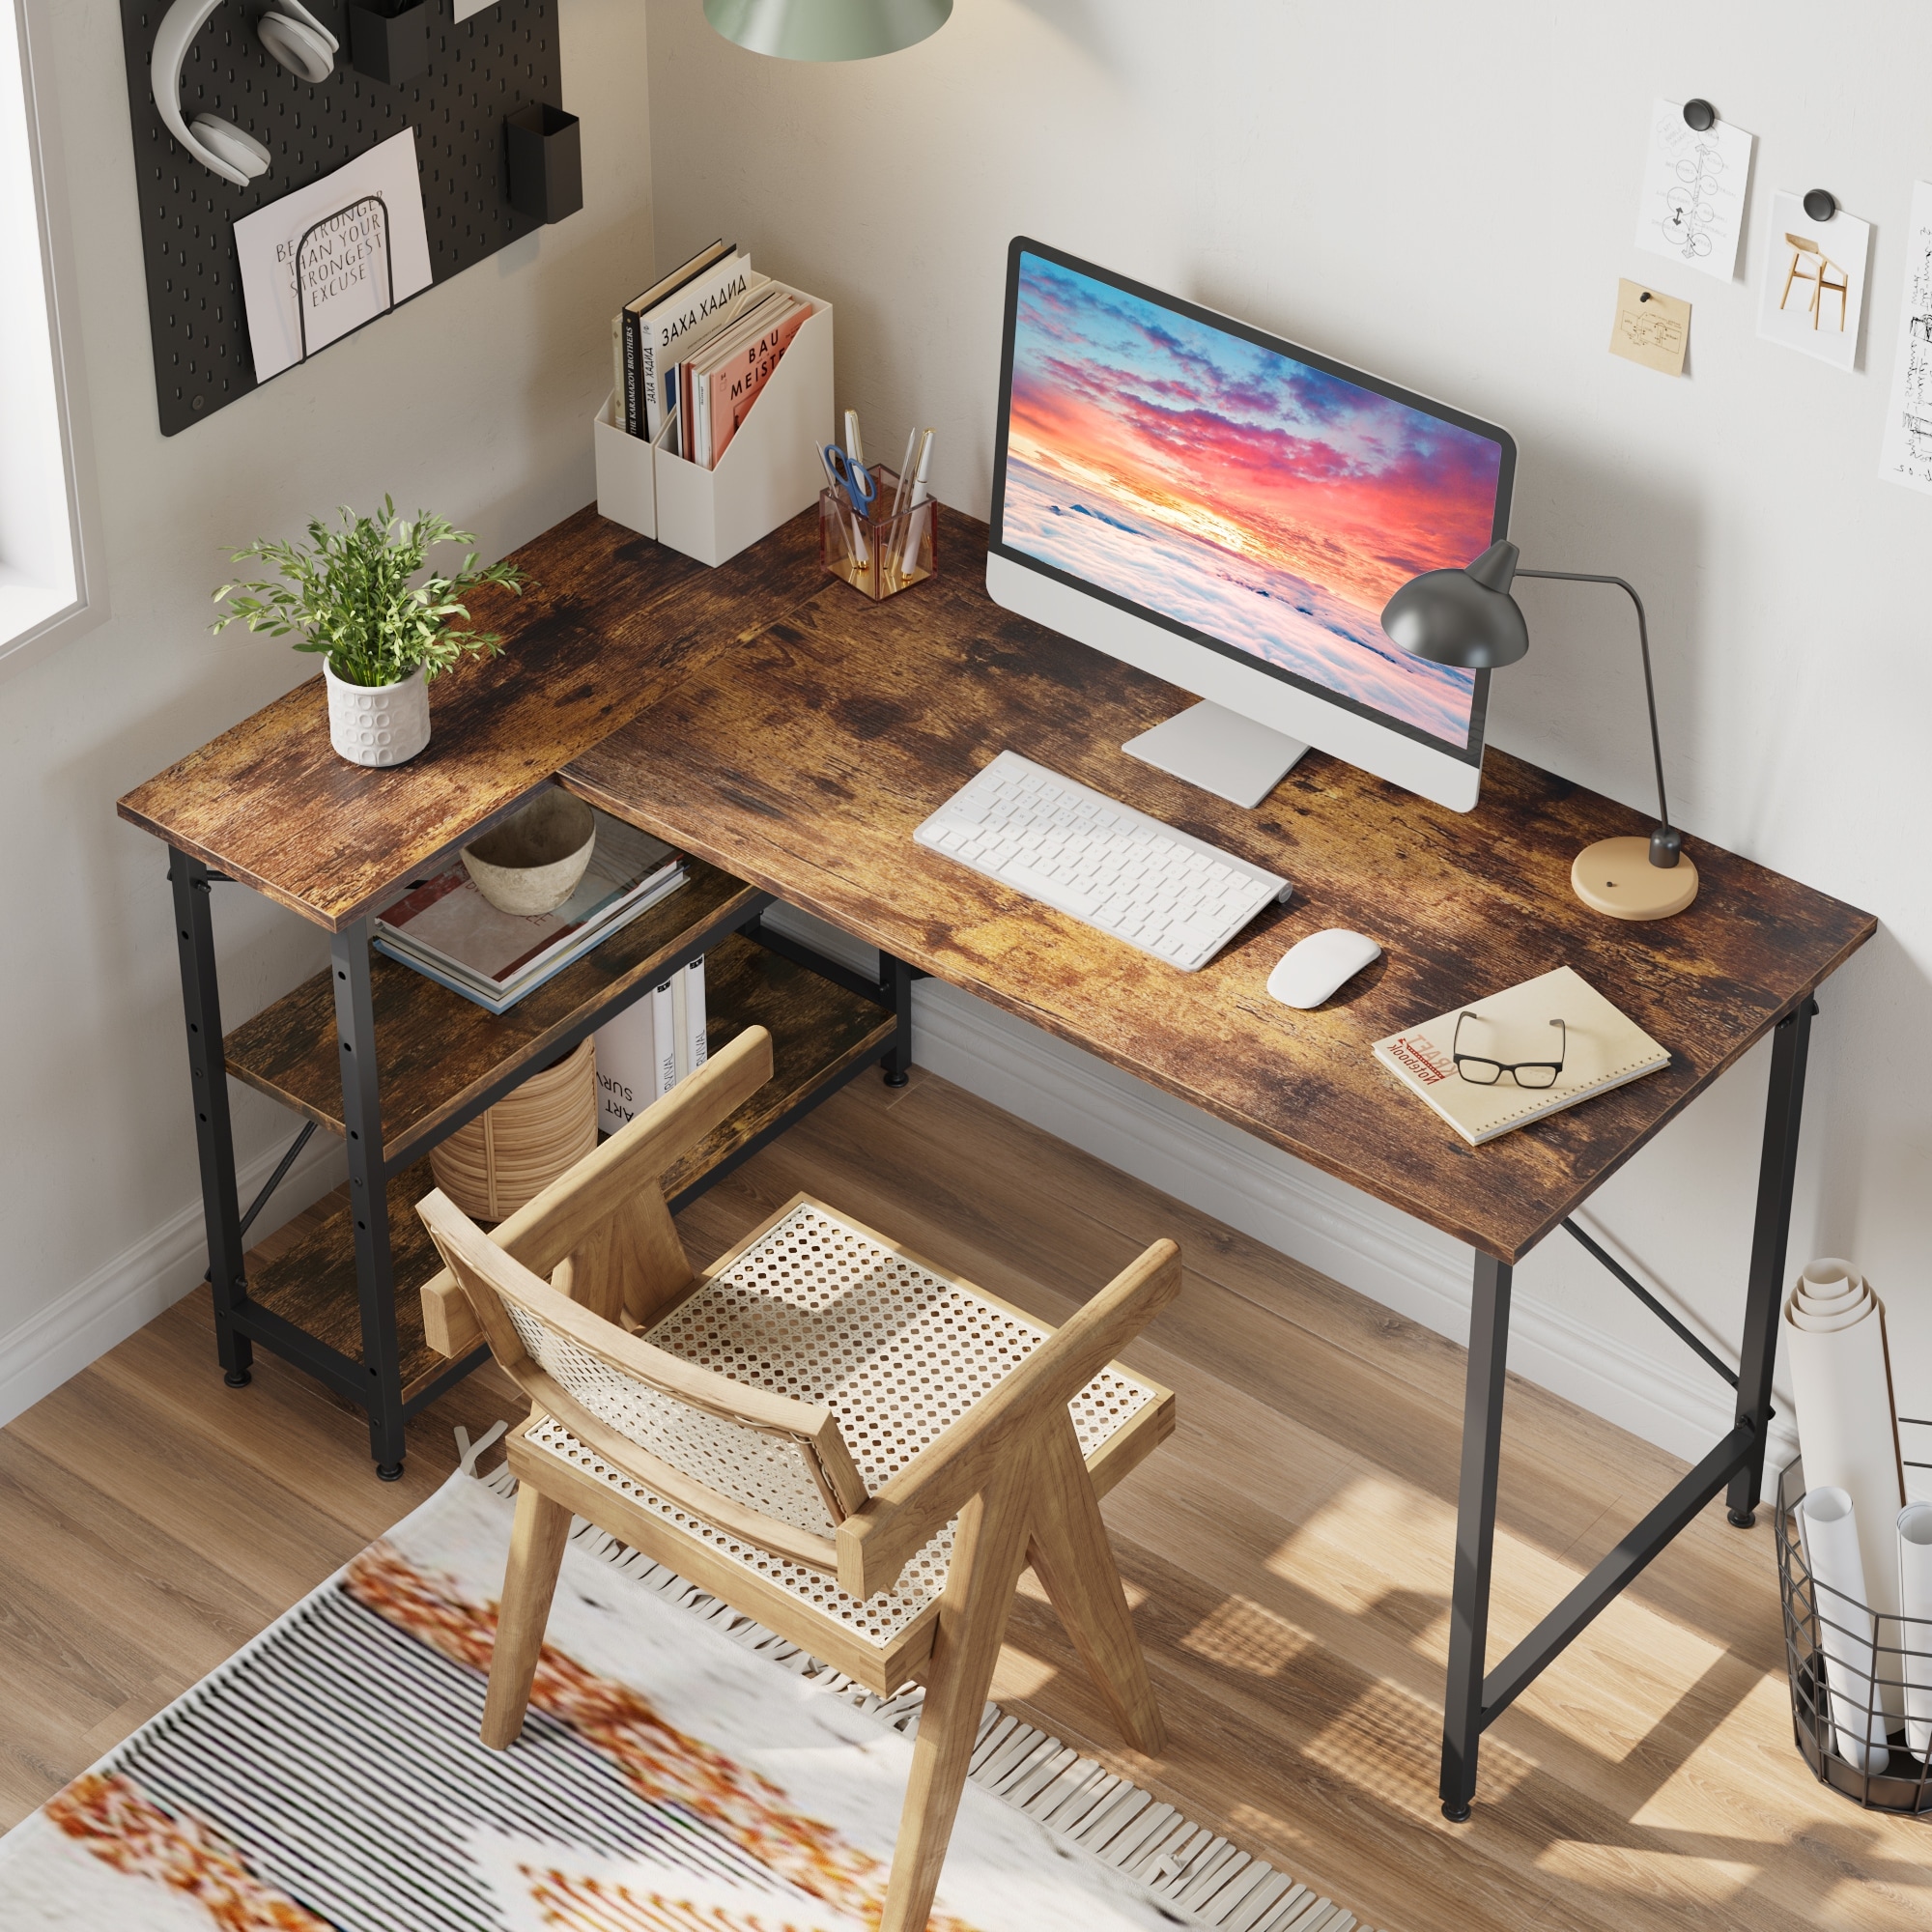 Bestier L Shaped Desk for Home Office, Farmhouse Computer Desk with Storage  Cabinet, Office Desk with Bookshelf, 2 Person Computer Desk Up to 82 inch